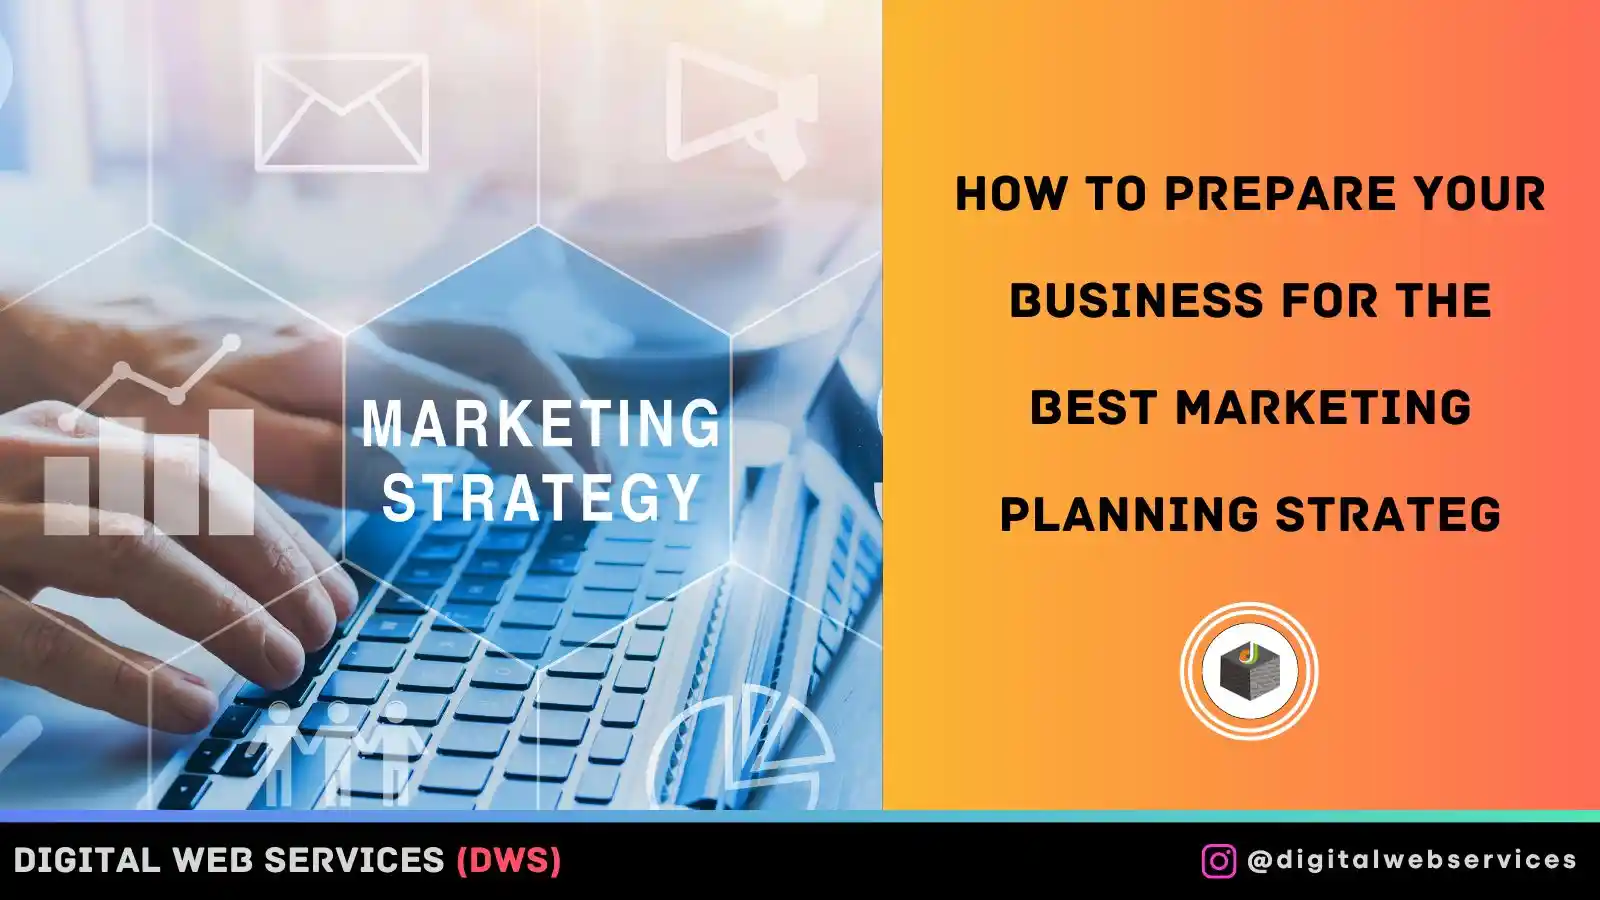 How to Prepare Your Business for the Best Marketing Planning Strateg